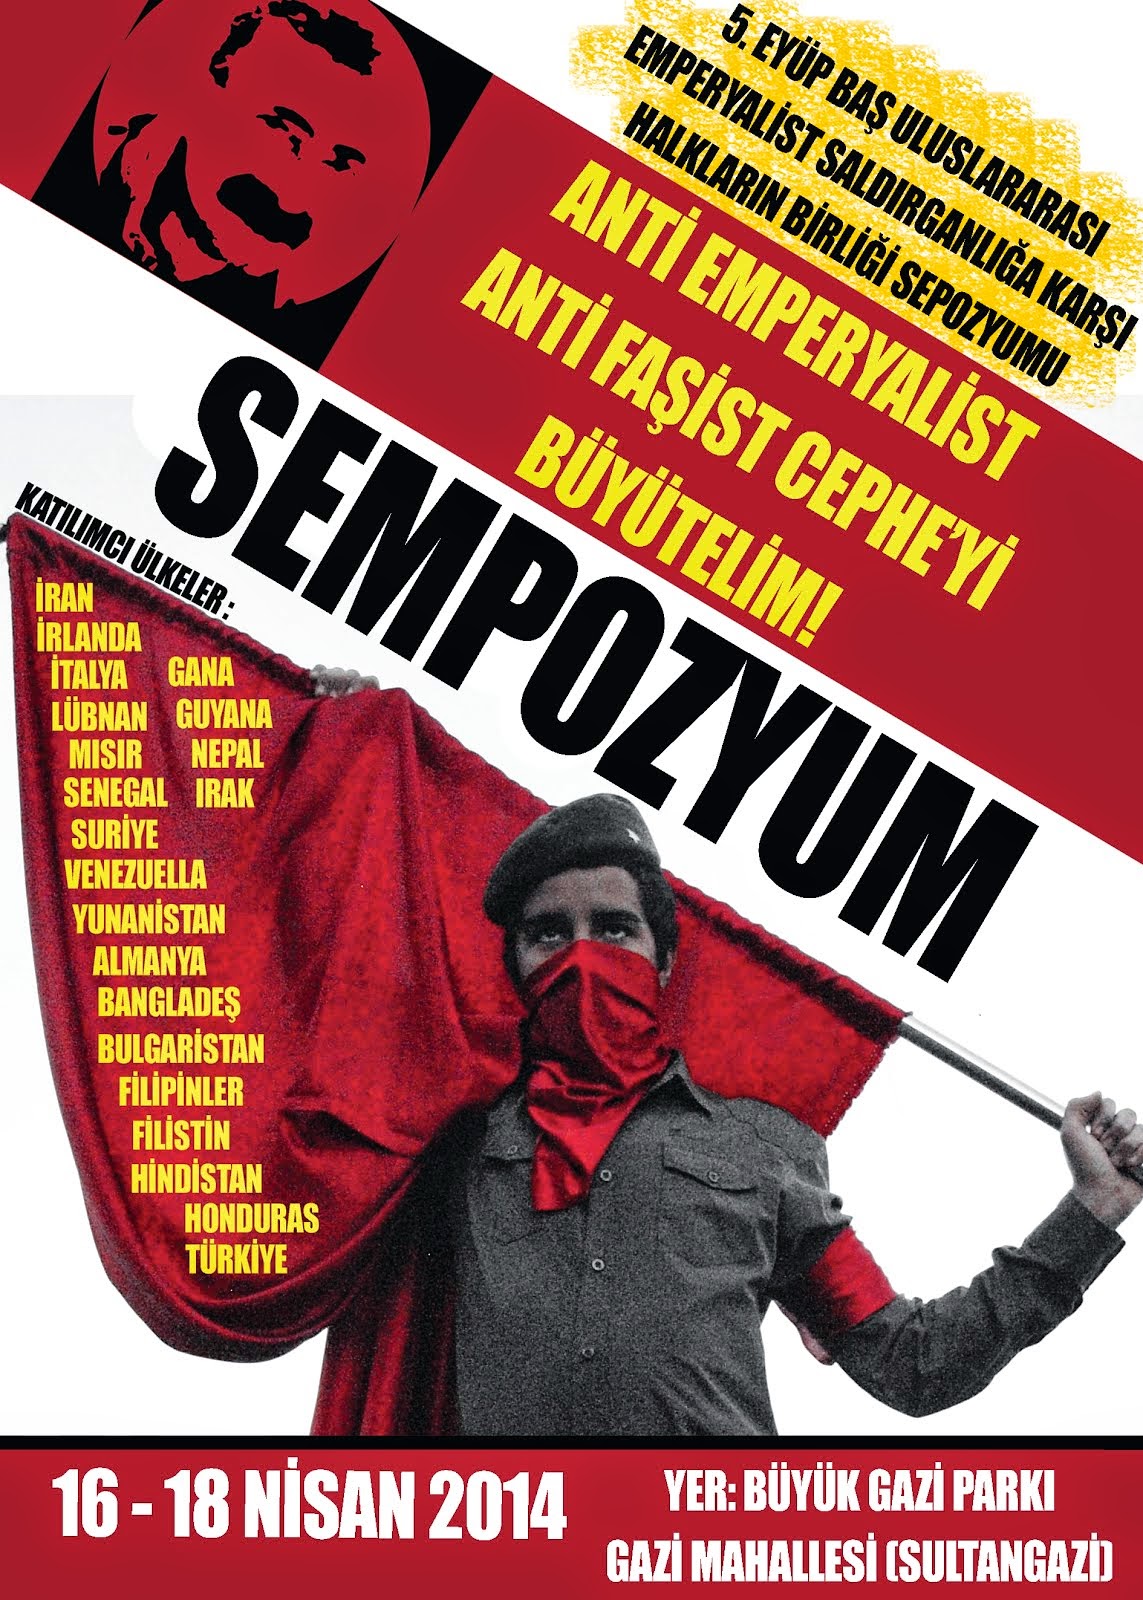 Simposio Internazionale di Istanbul - Symposium of the peoples union against the imperialist aggres